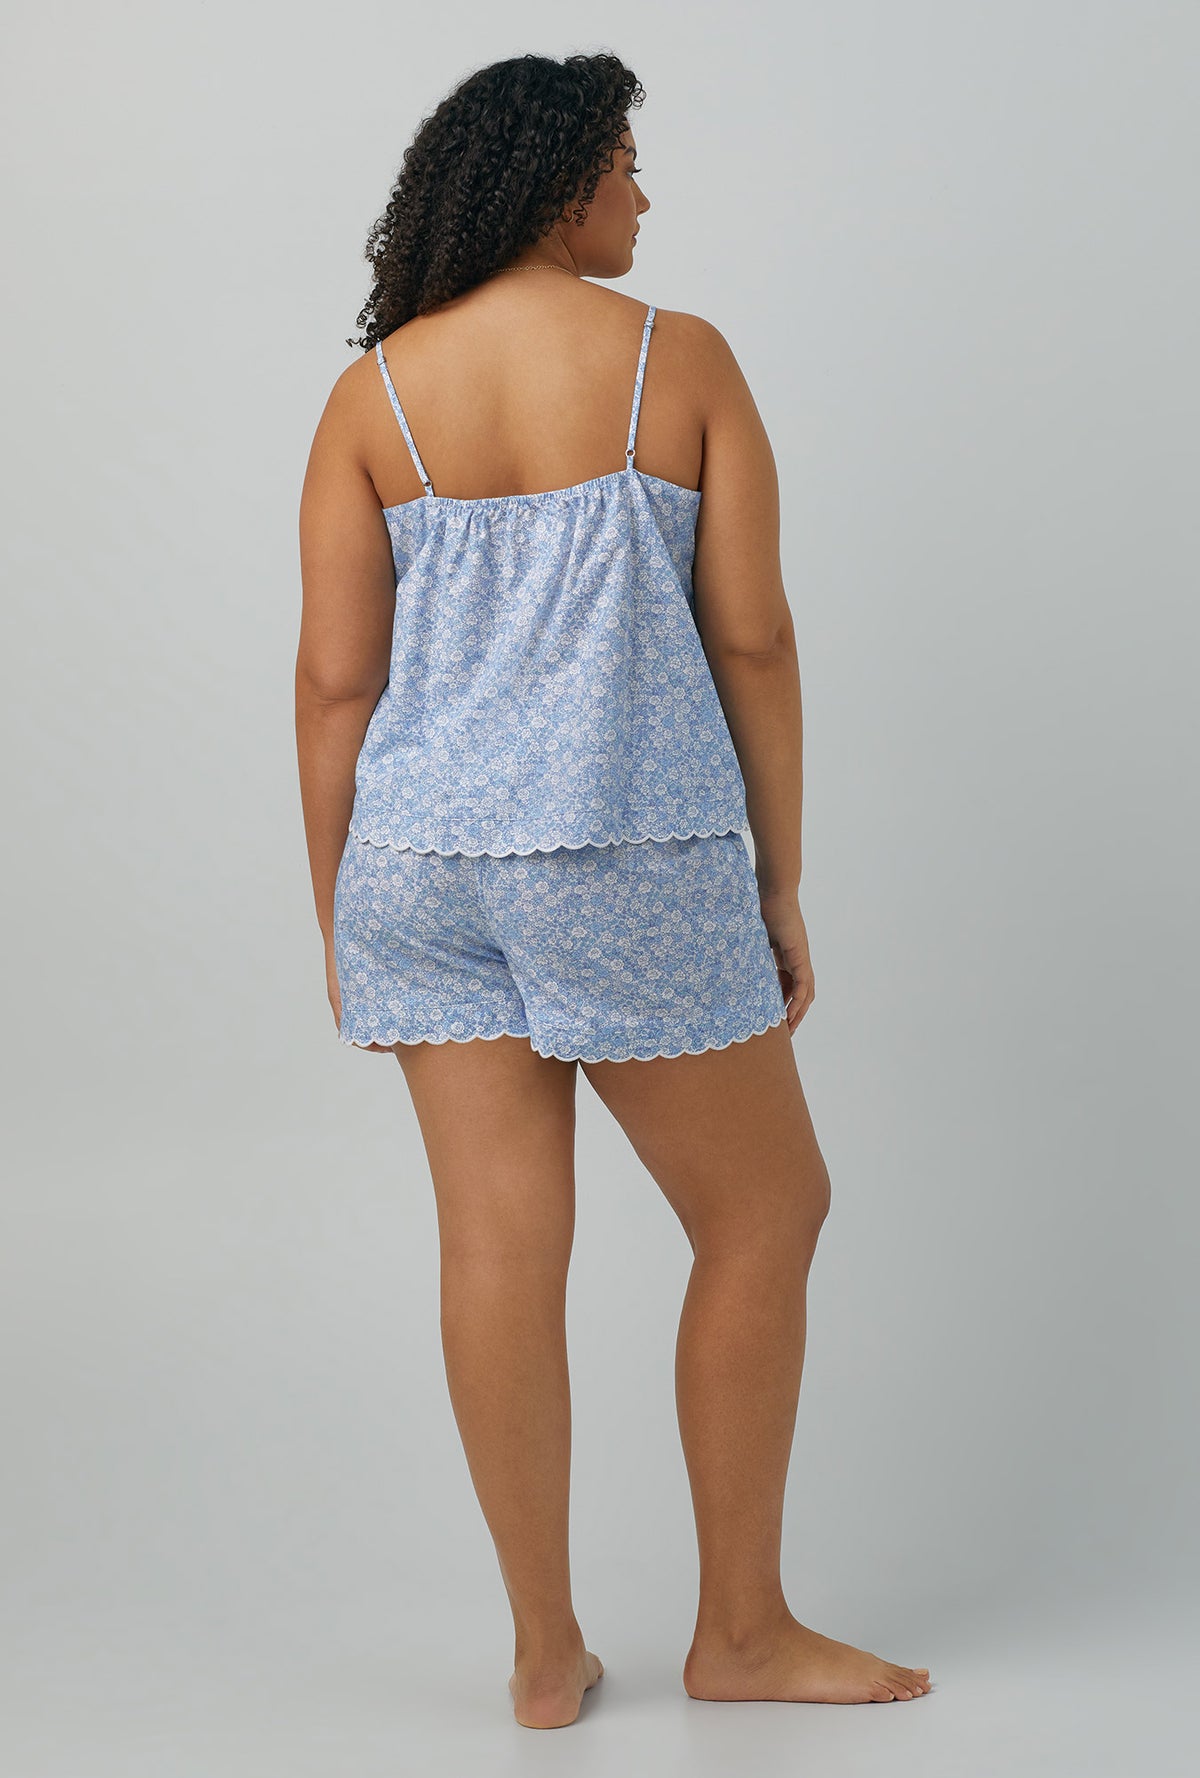 A lady wearing Cami Woven Cotton Silk Shorty PJ Set with Something Blue Scallop